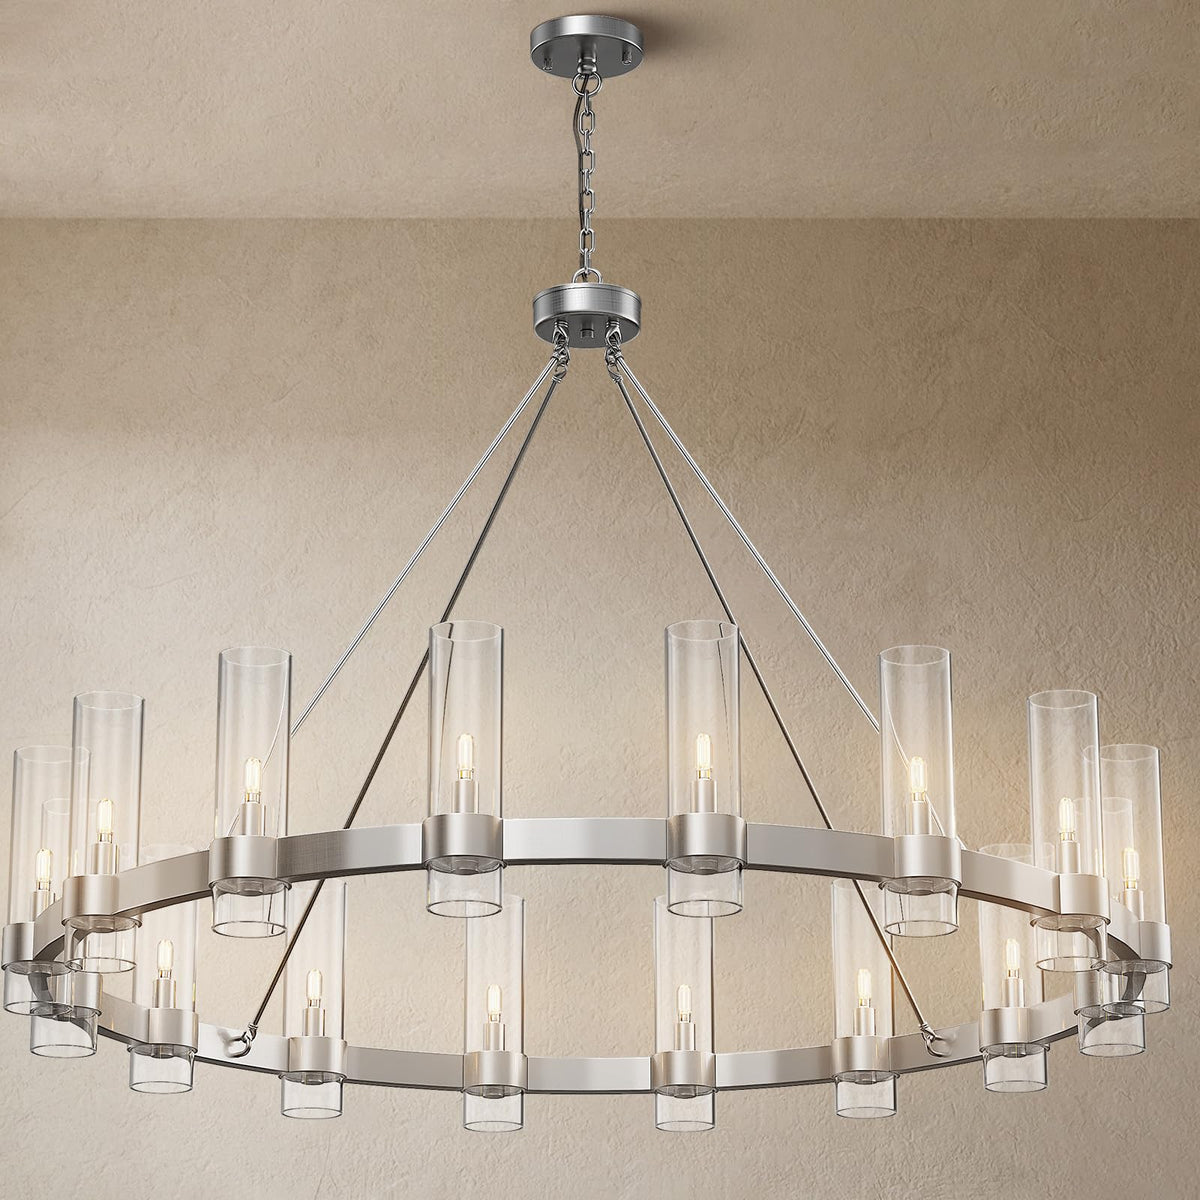 16-Lights Modern Chandelier,Wagon Wheel Chandelier with Glass Shade, Nickel48 Inch Large Round Industrial High Ceilings Pendant Lighting Fixture for Dining Living Room, Kitchen Island, Foyer